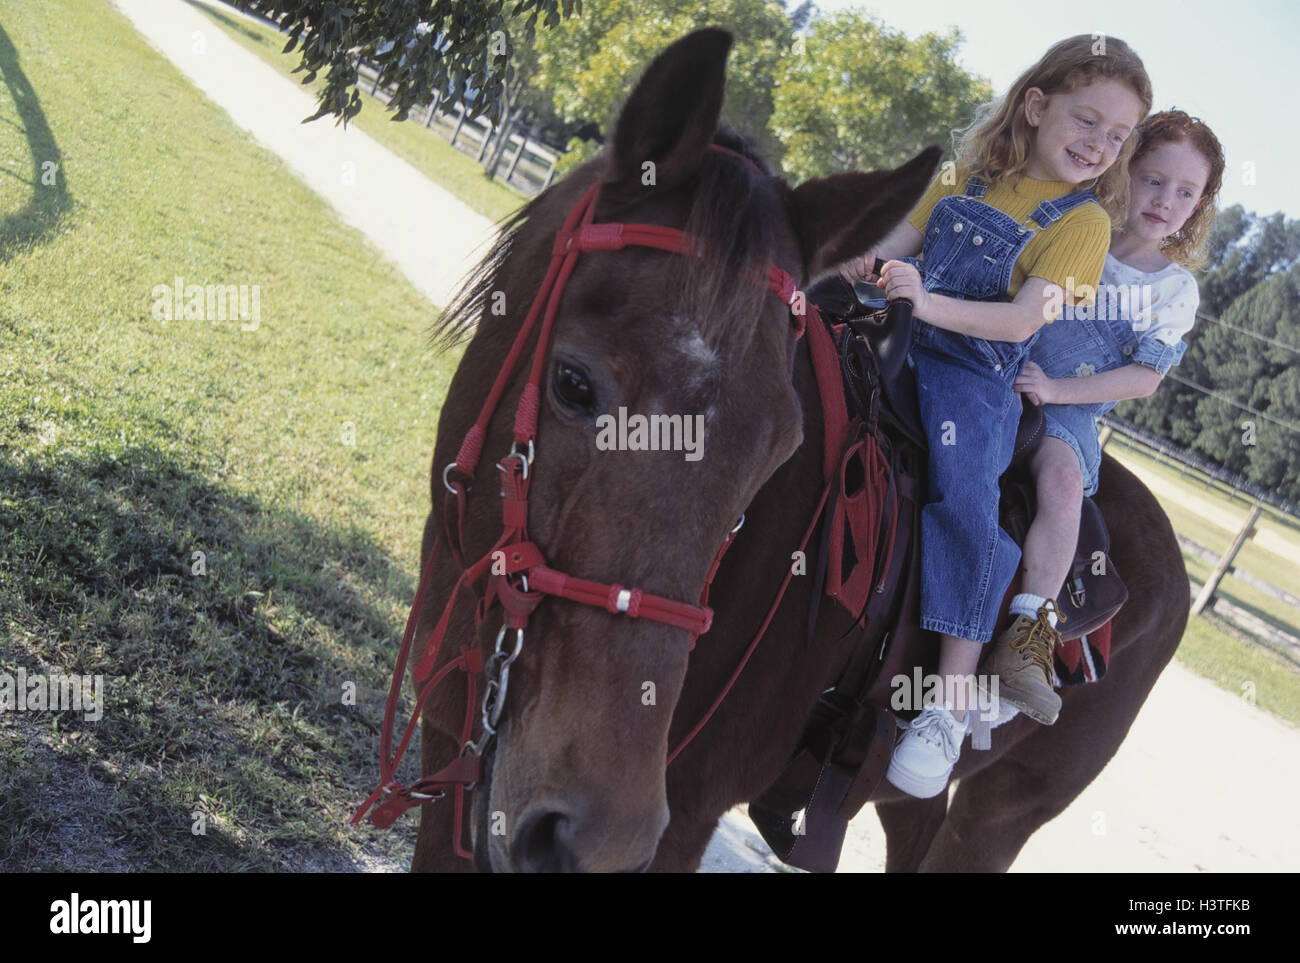 Horse, girl, siblings, ride, Gestüt, riding horse, sisters, friendship, friends, horse's backs, holidays, bleed court, farm, leisure time, hobby, fun, amusement, sport, horse-riding, joy happily, outside Stock Photo